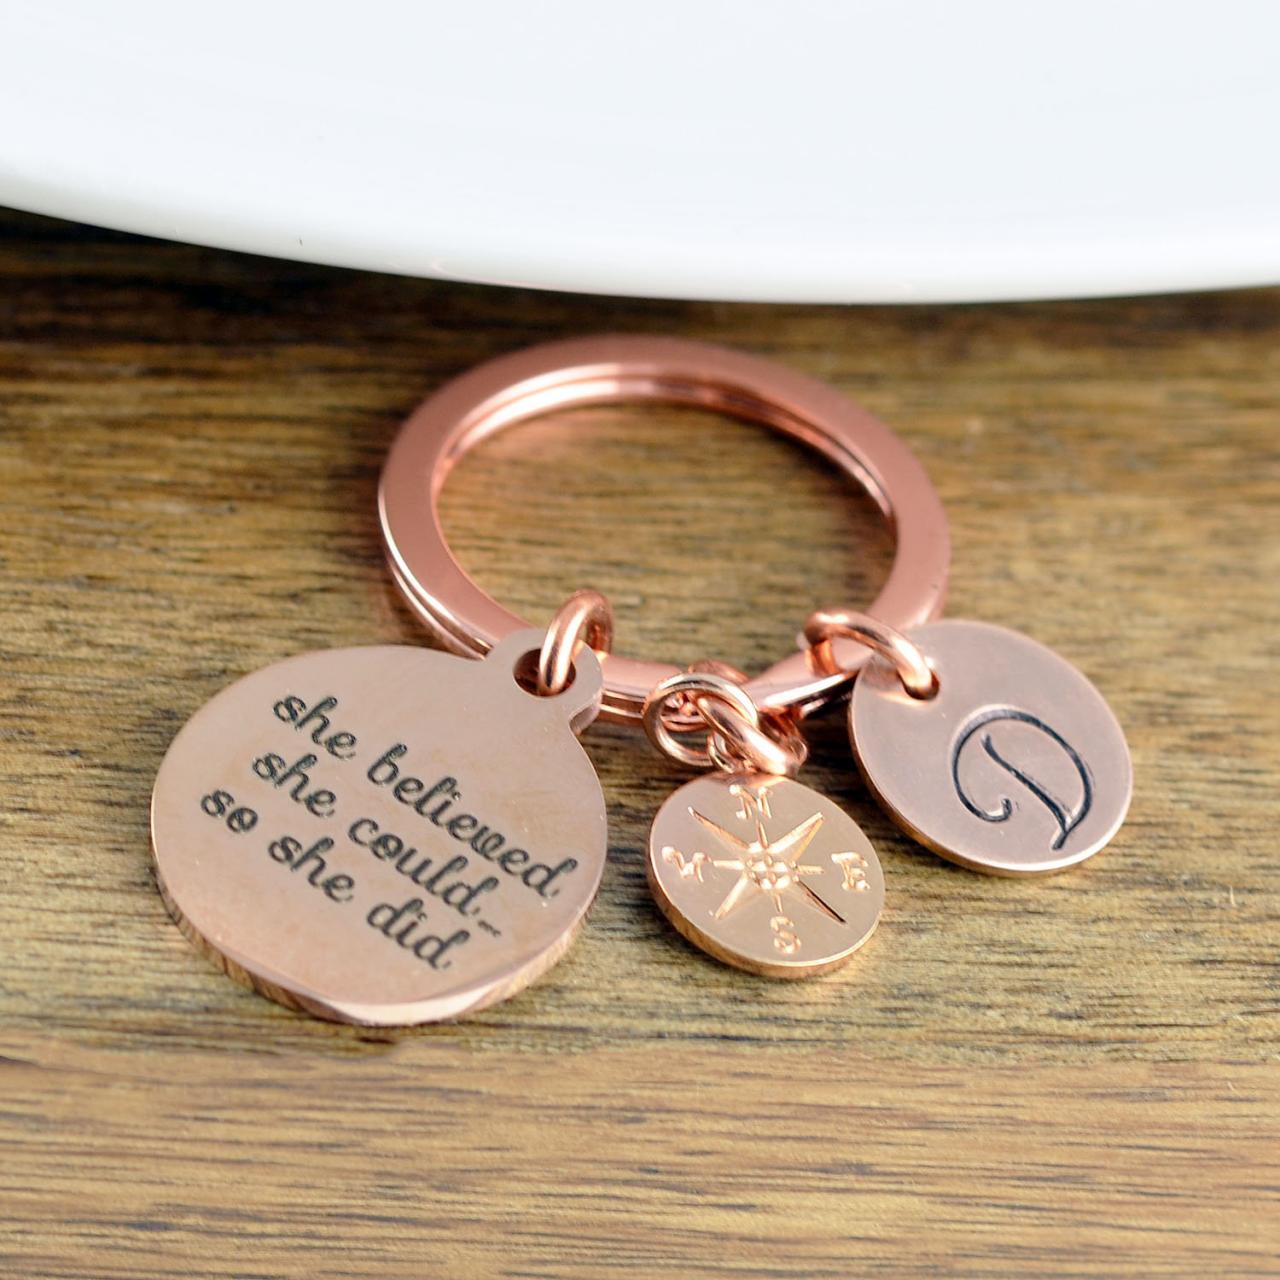 She Believed She Could, Graduation Gift, Personalized Graduation Keychain, Class Of 2019, Senior Gift, College Graduation